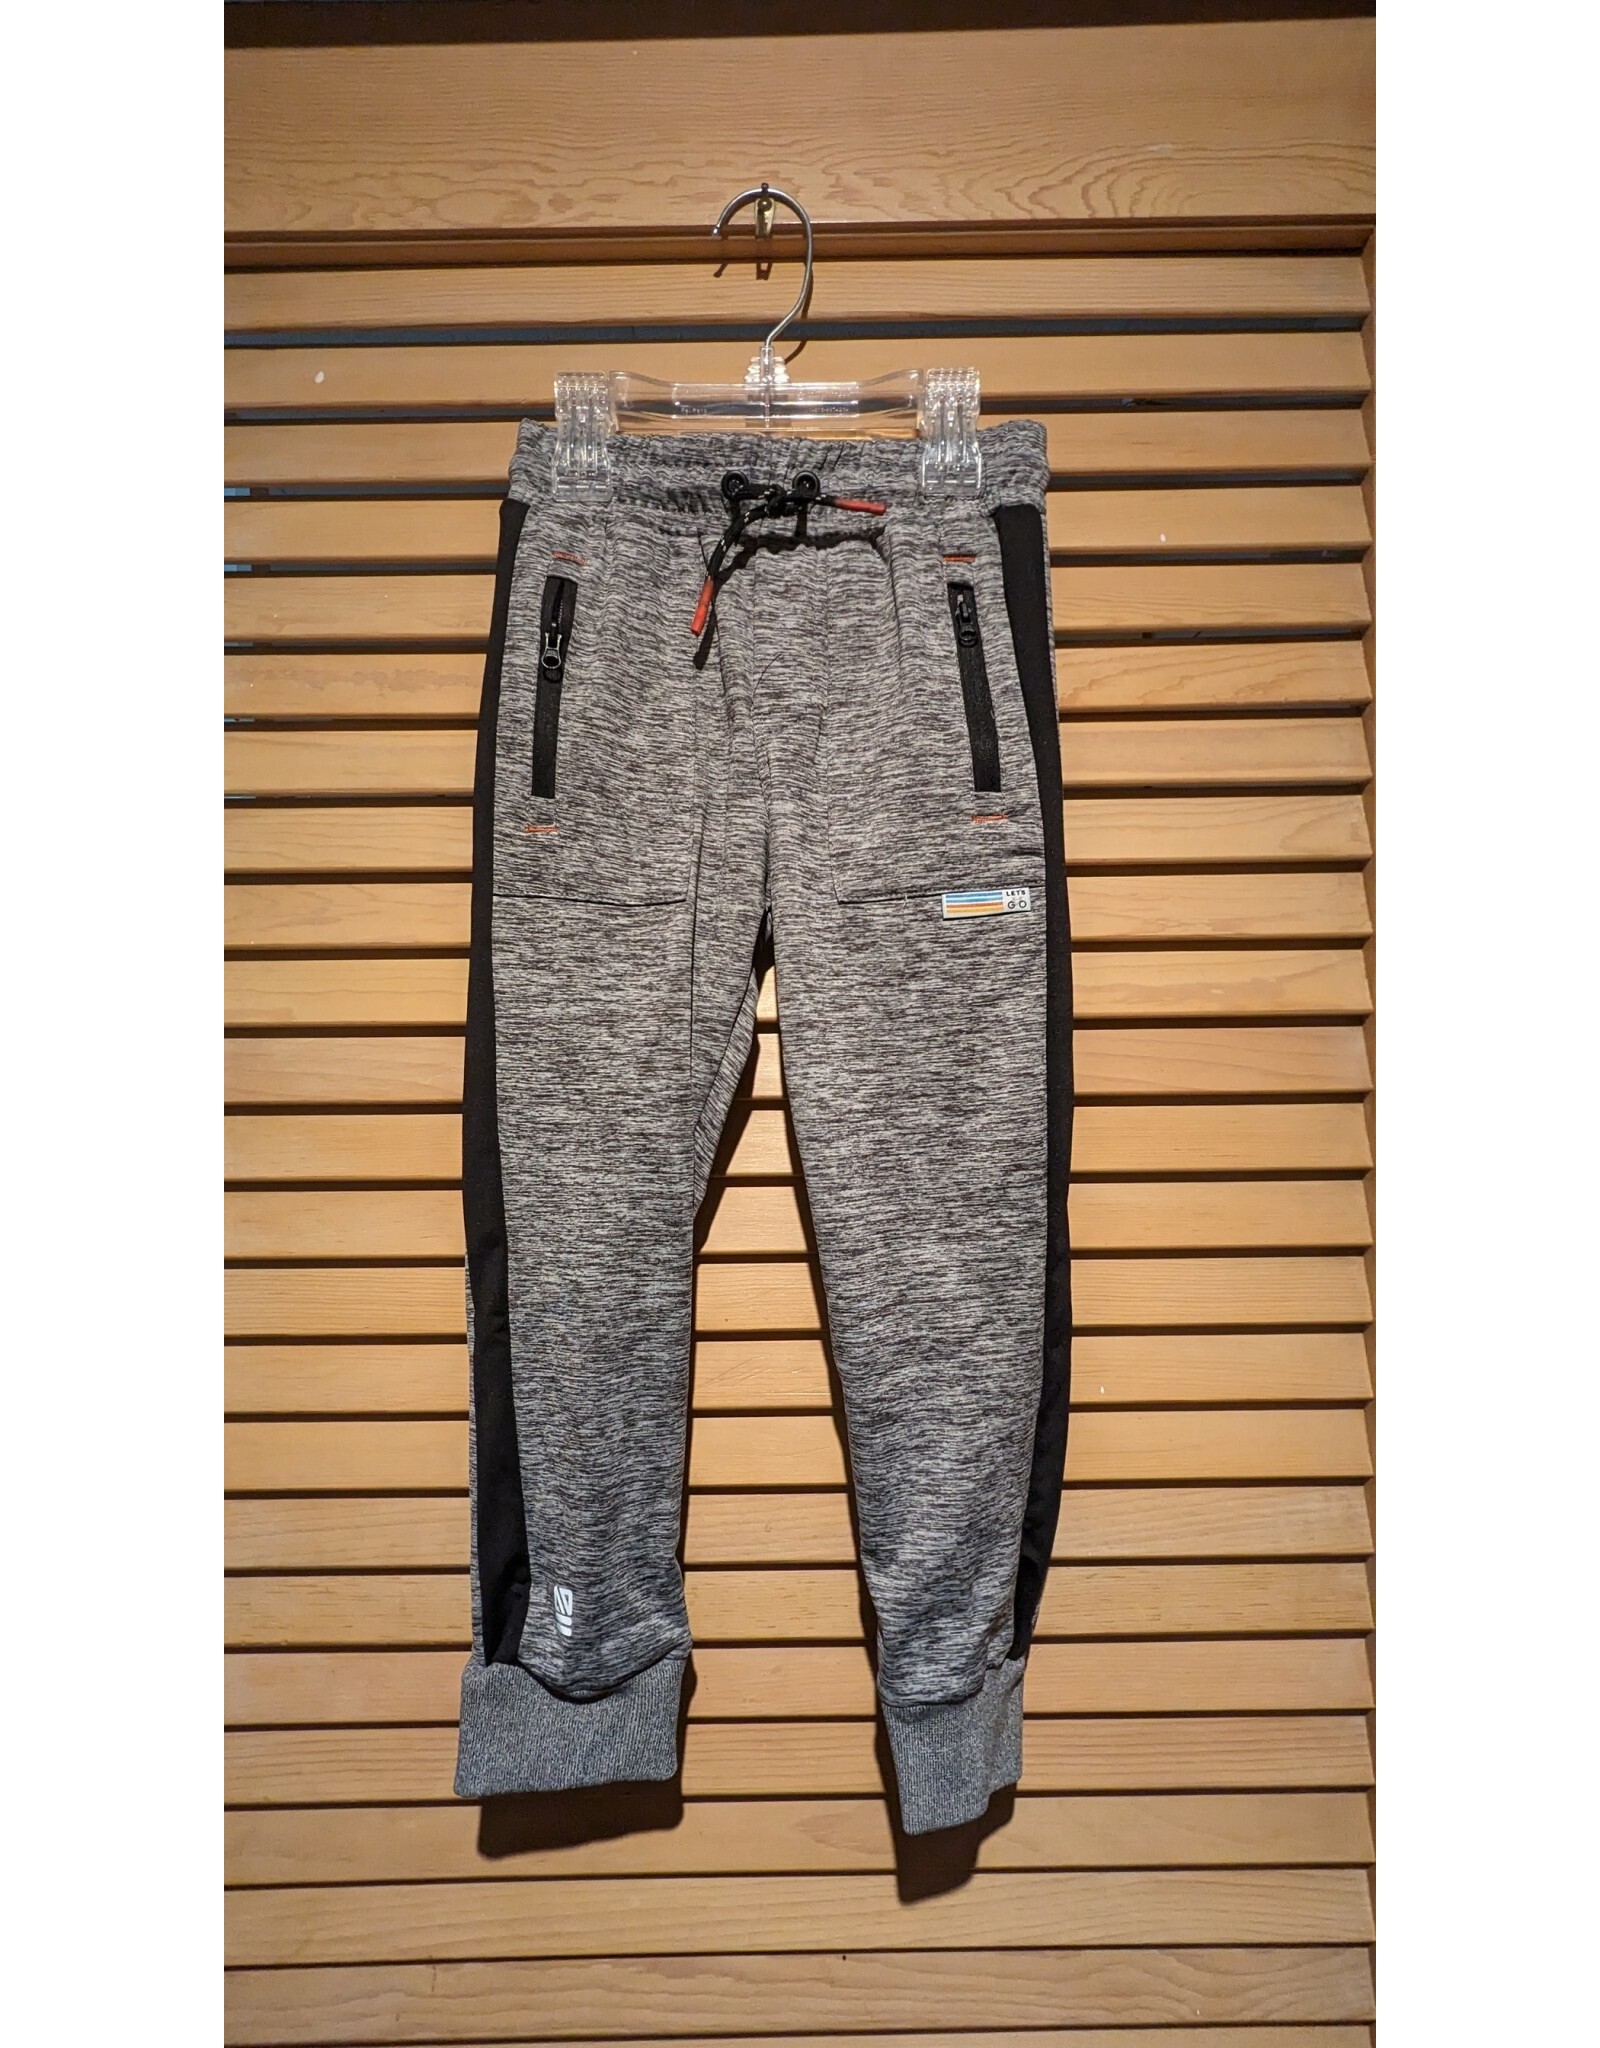 Noruk Spring into Action Athletic Pants